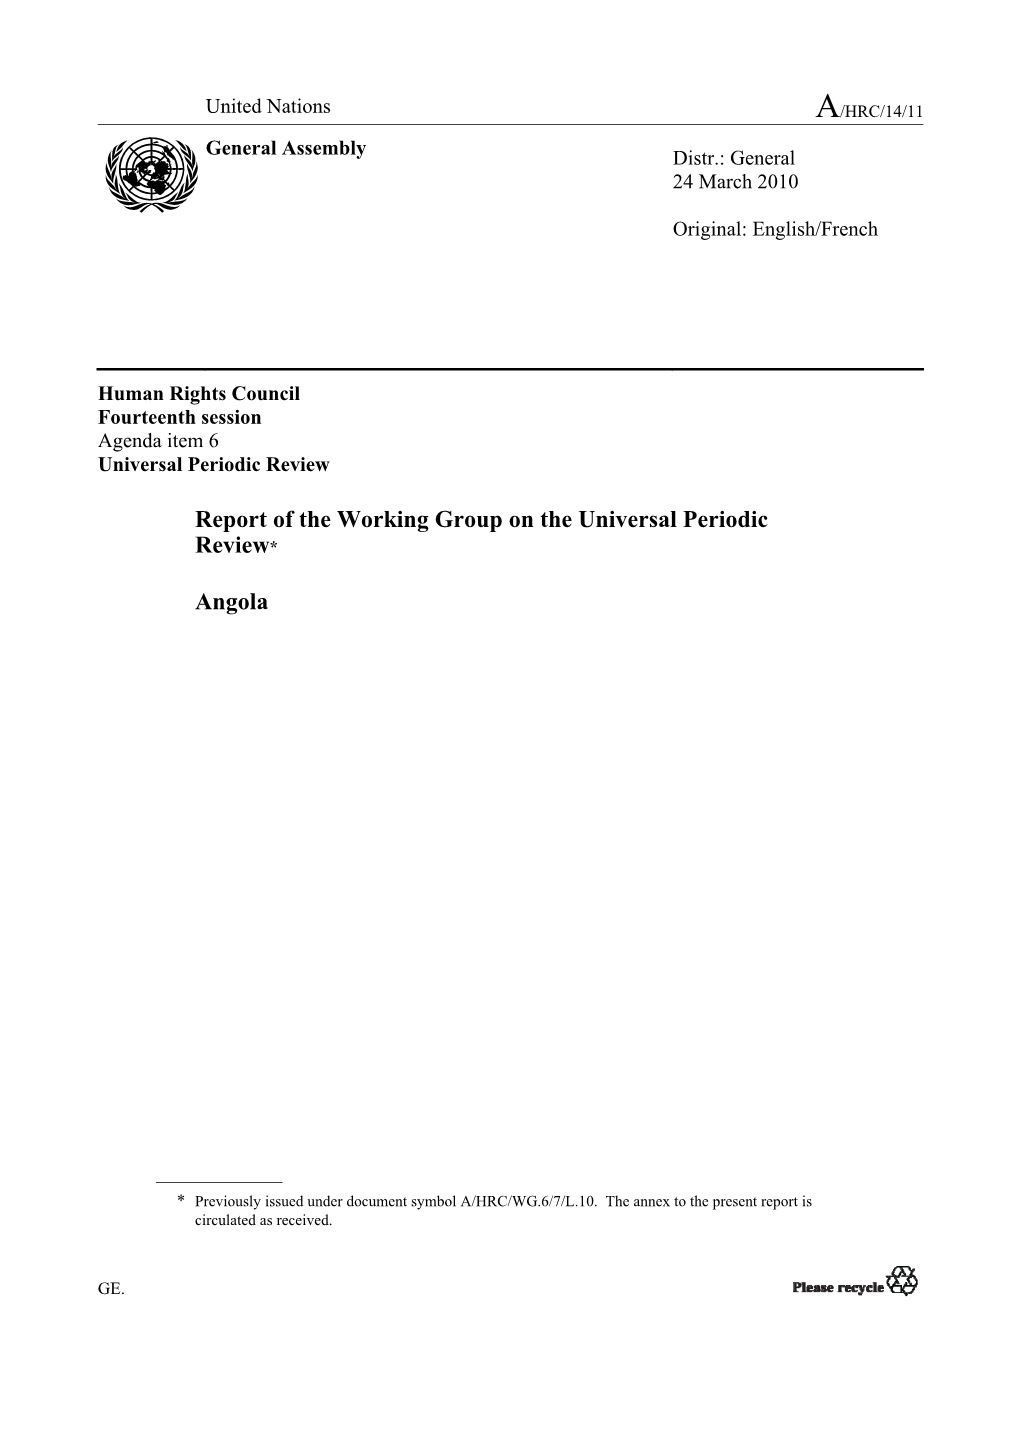 Report of the Working Group on the Universal Periodic Review* Angola